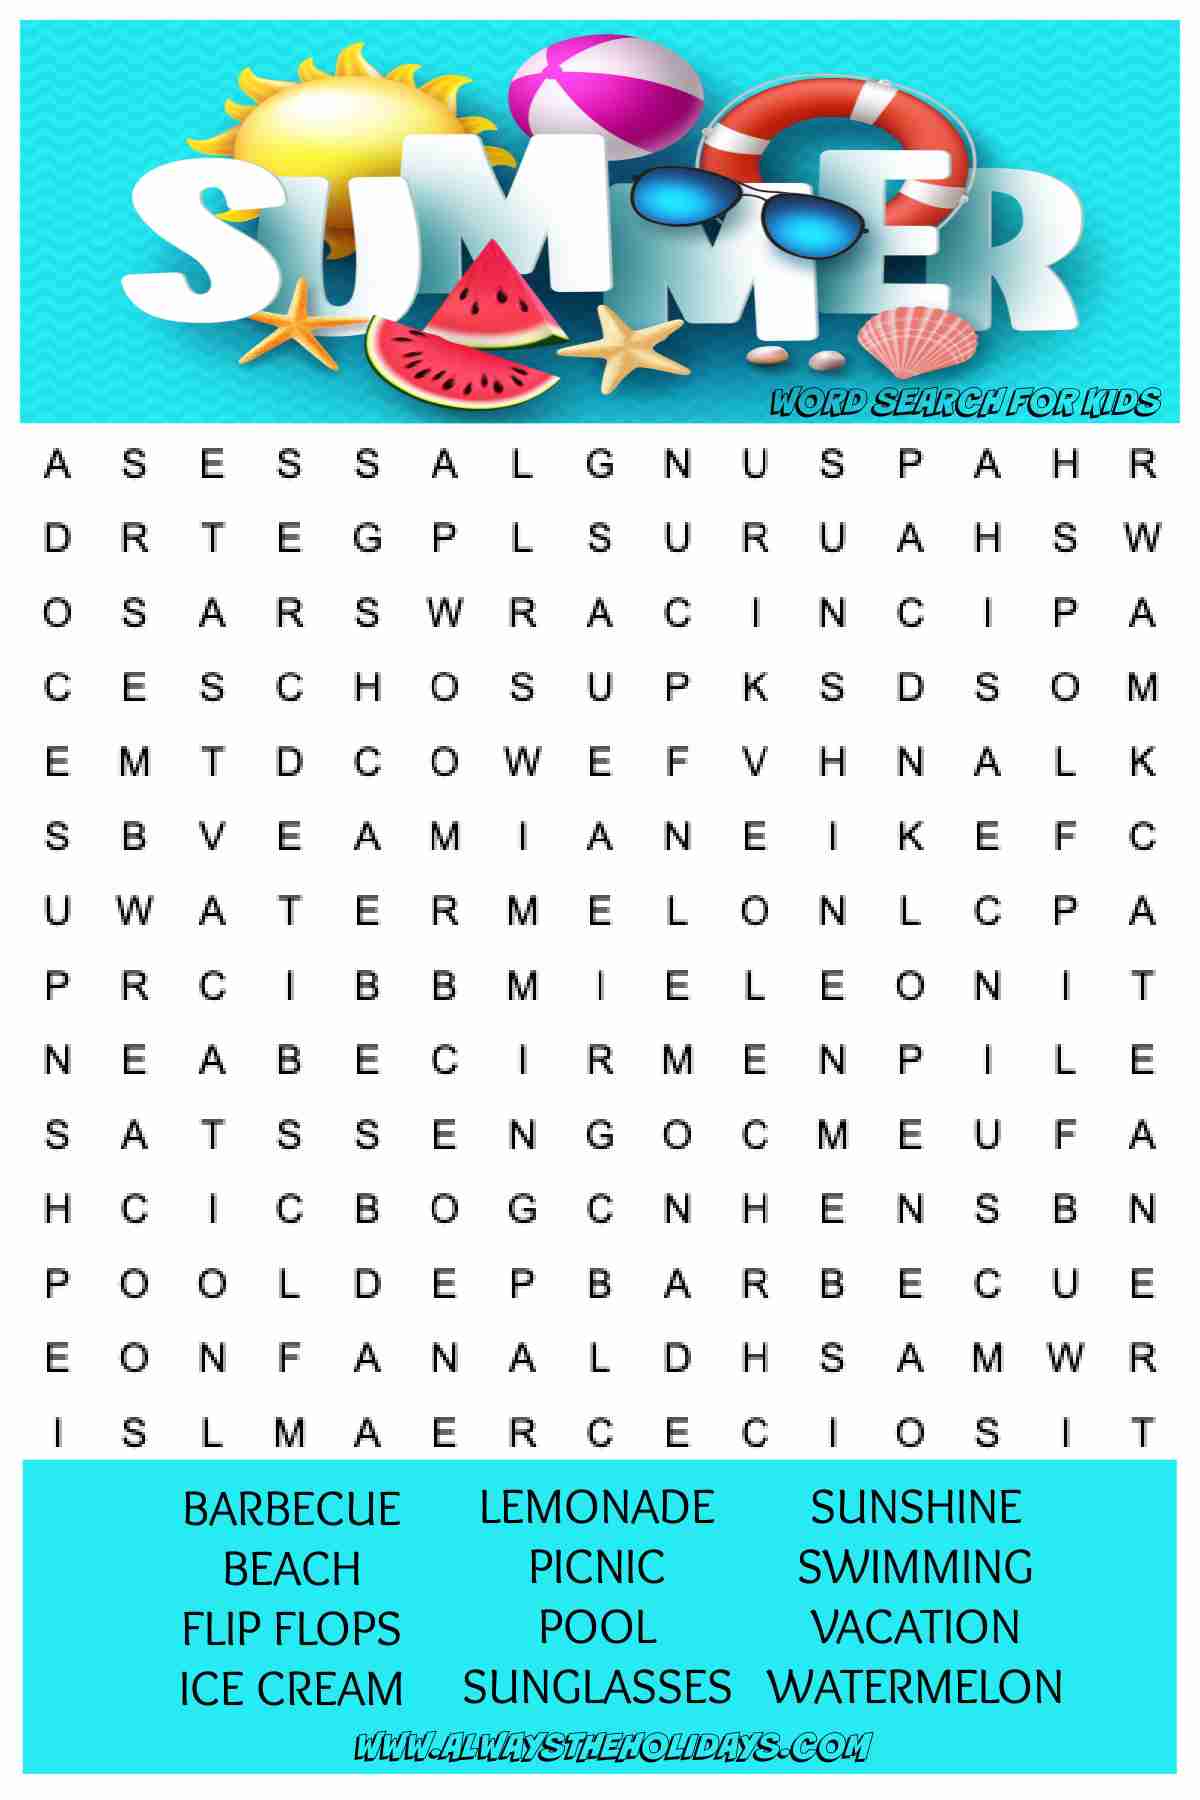 A printable summer word search for kids in with a word bank at the bottom, and the word summer at the top surrounded by beach day items.